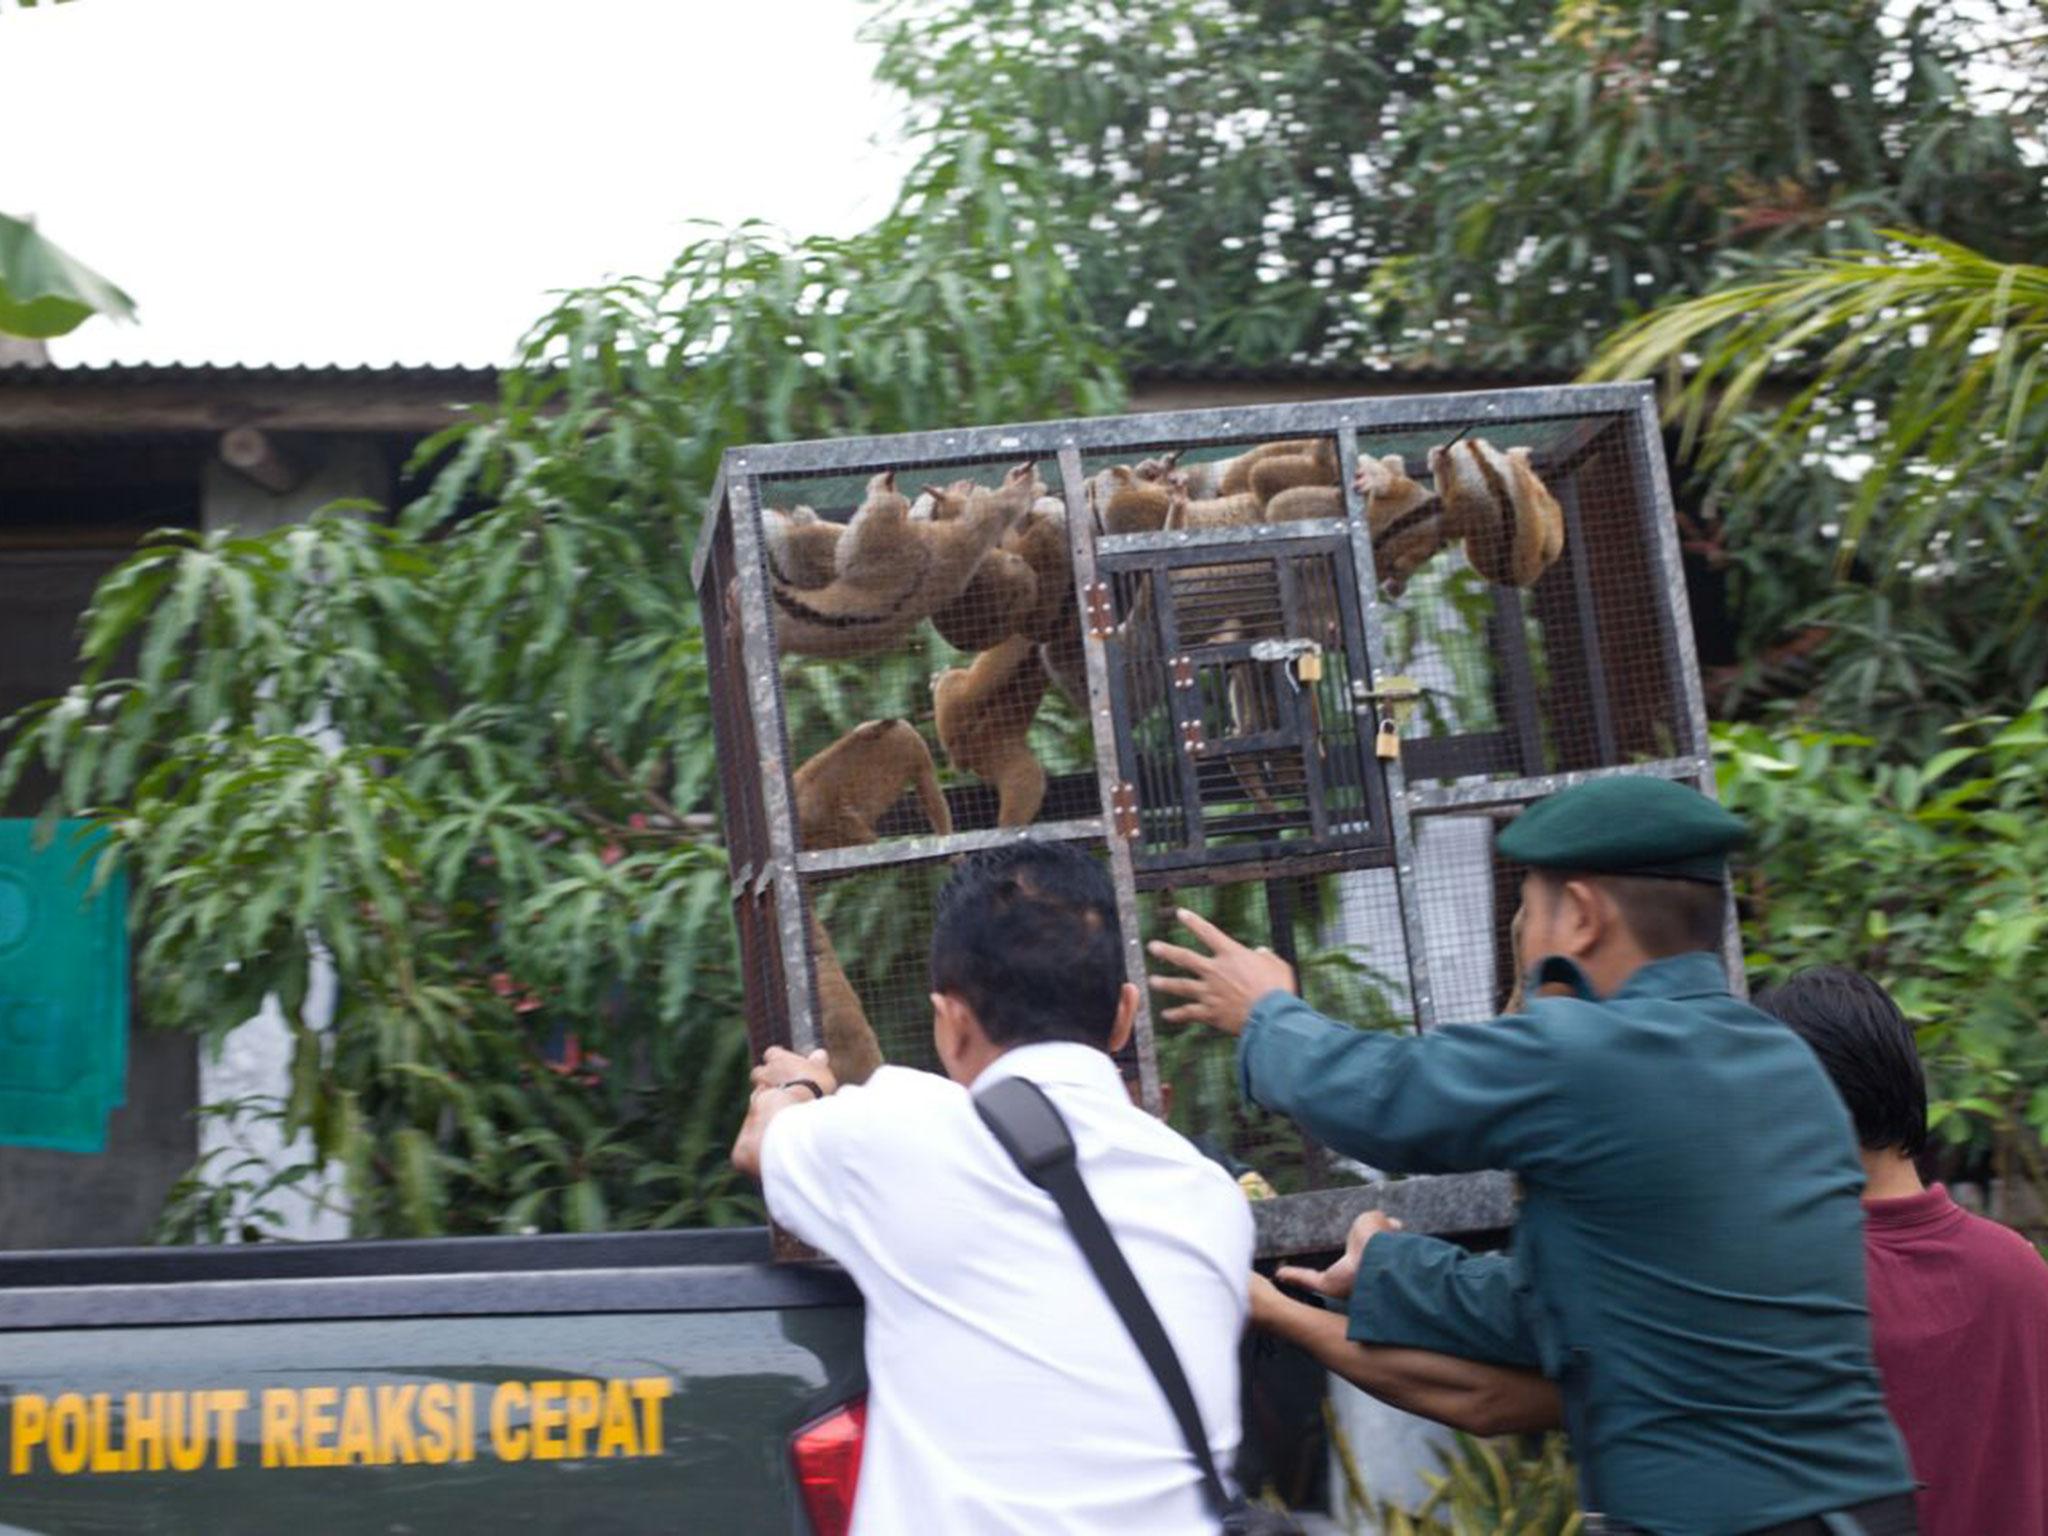 People discovered to be illegally trading wild animals in Indonesia risk a five year terms in jail